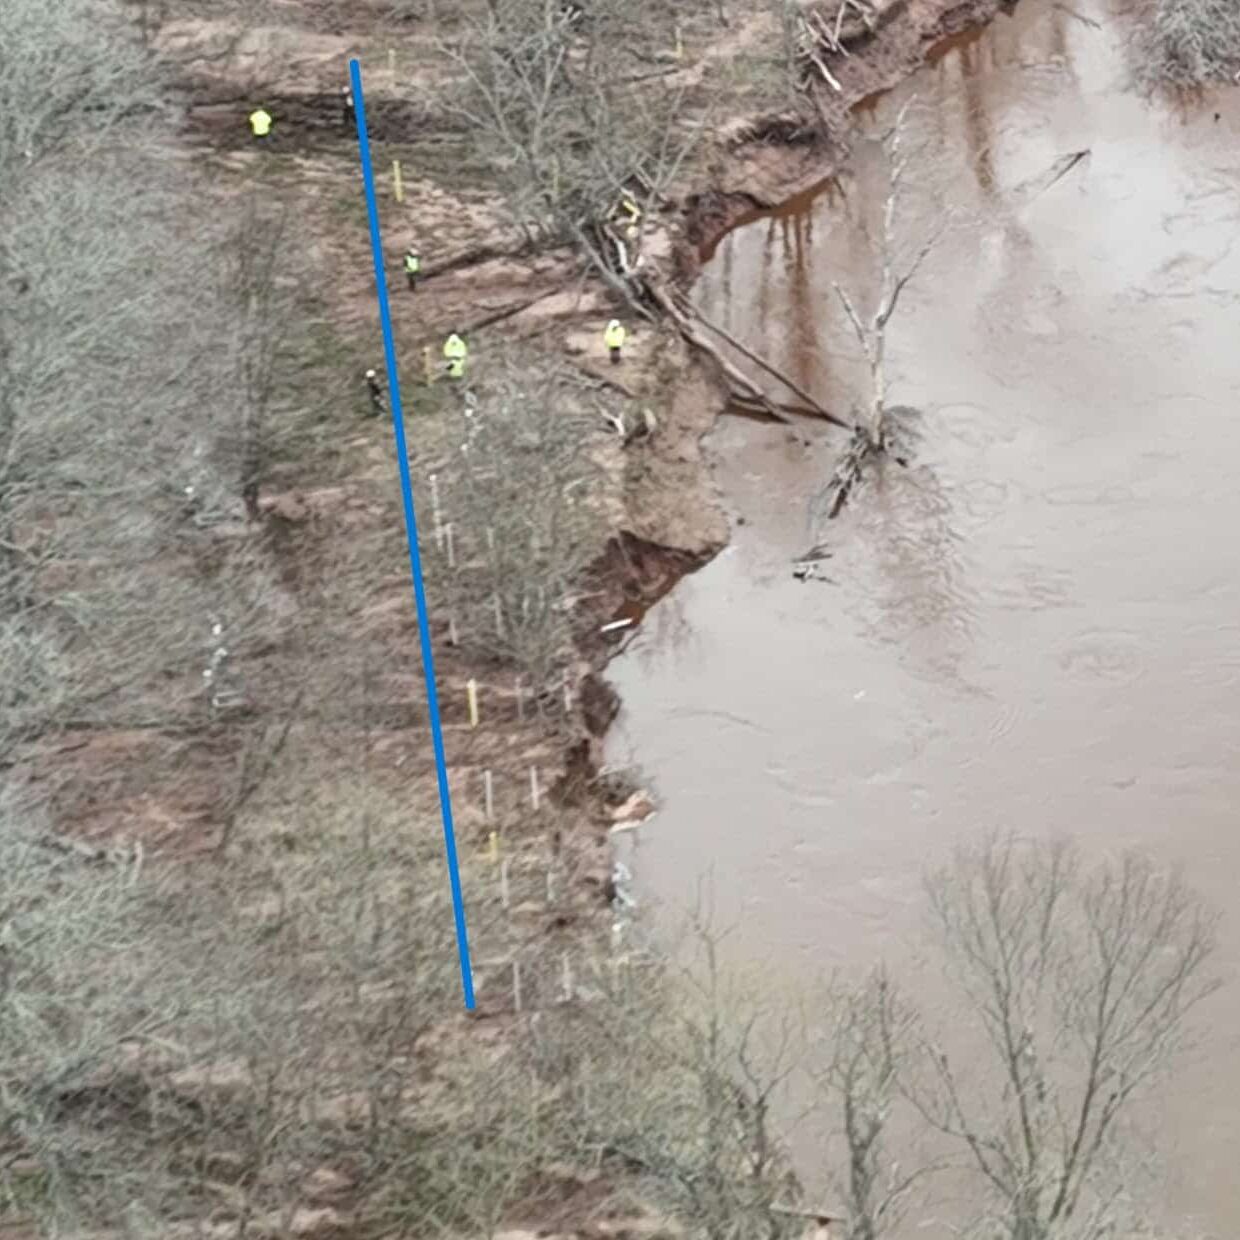 Still image from David Joe Bates’ drone footage taken May 14, 2023, showing Enbridge workers on the Line 5 pipeline site. The Mashkiiziibii (Bad River) riverbank is quickly eroding toward the active, decrepit pipeline, just 16 miles upstream from Lake Superior. 